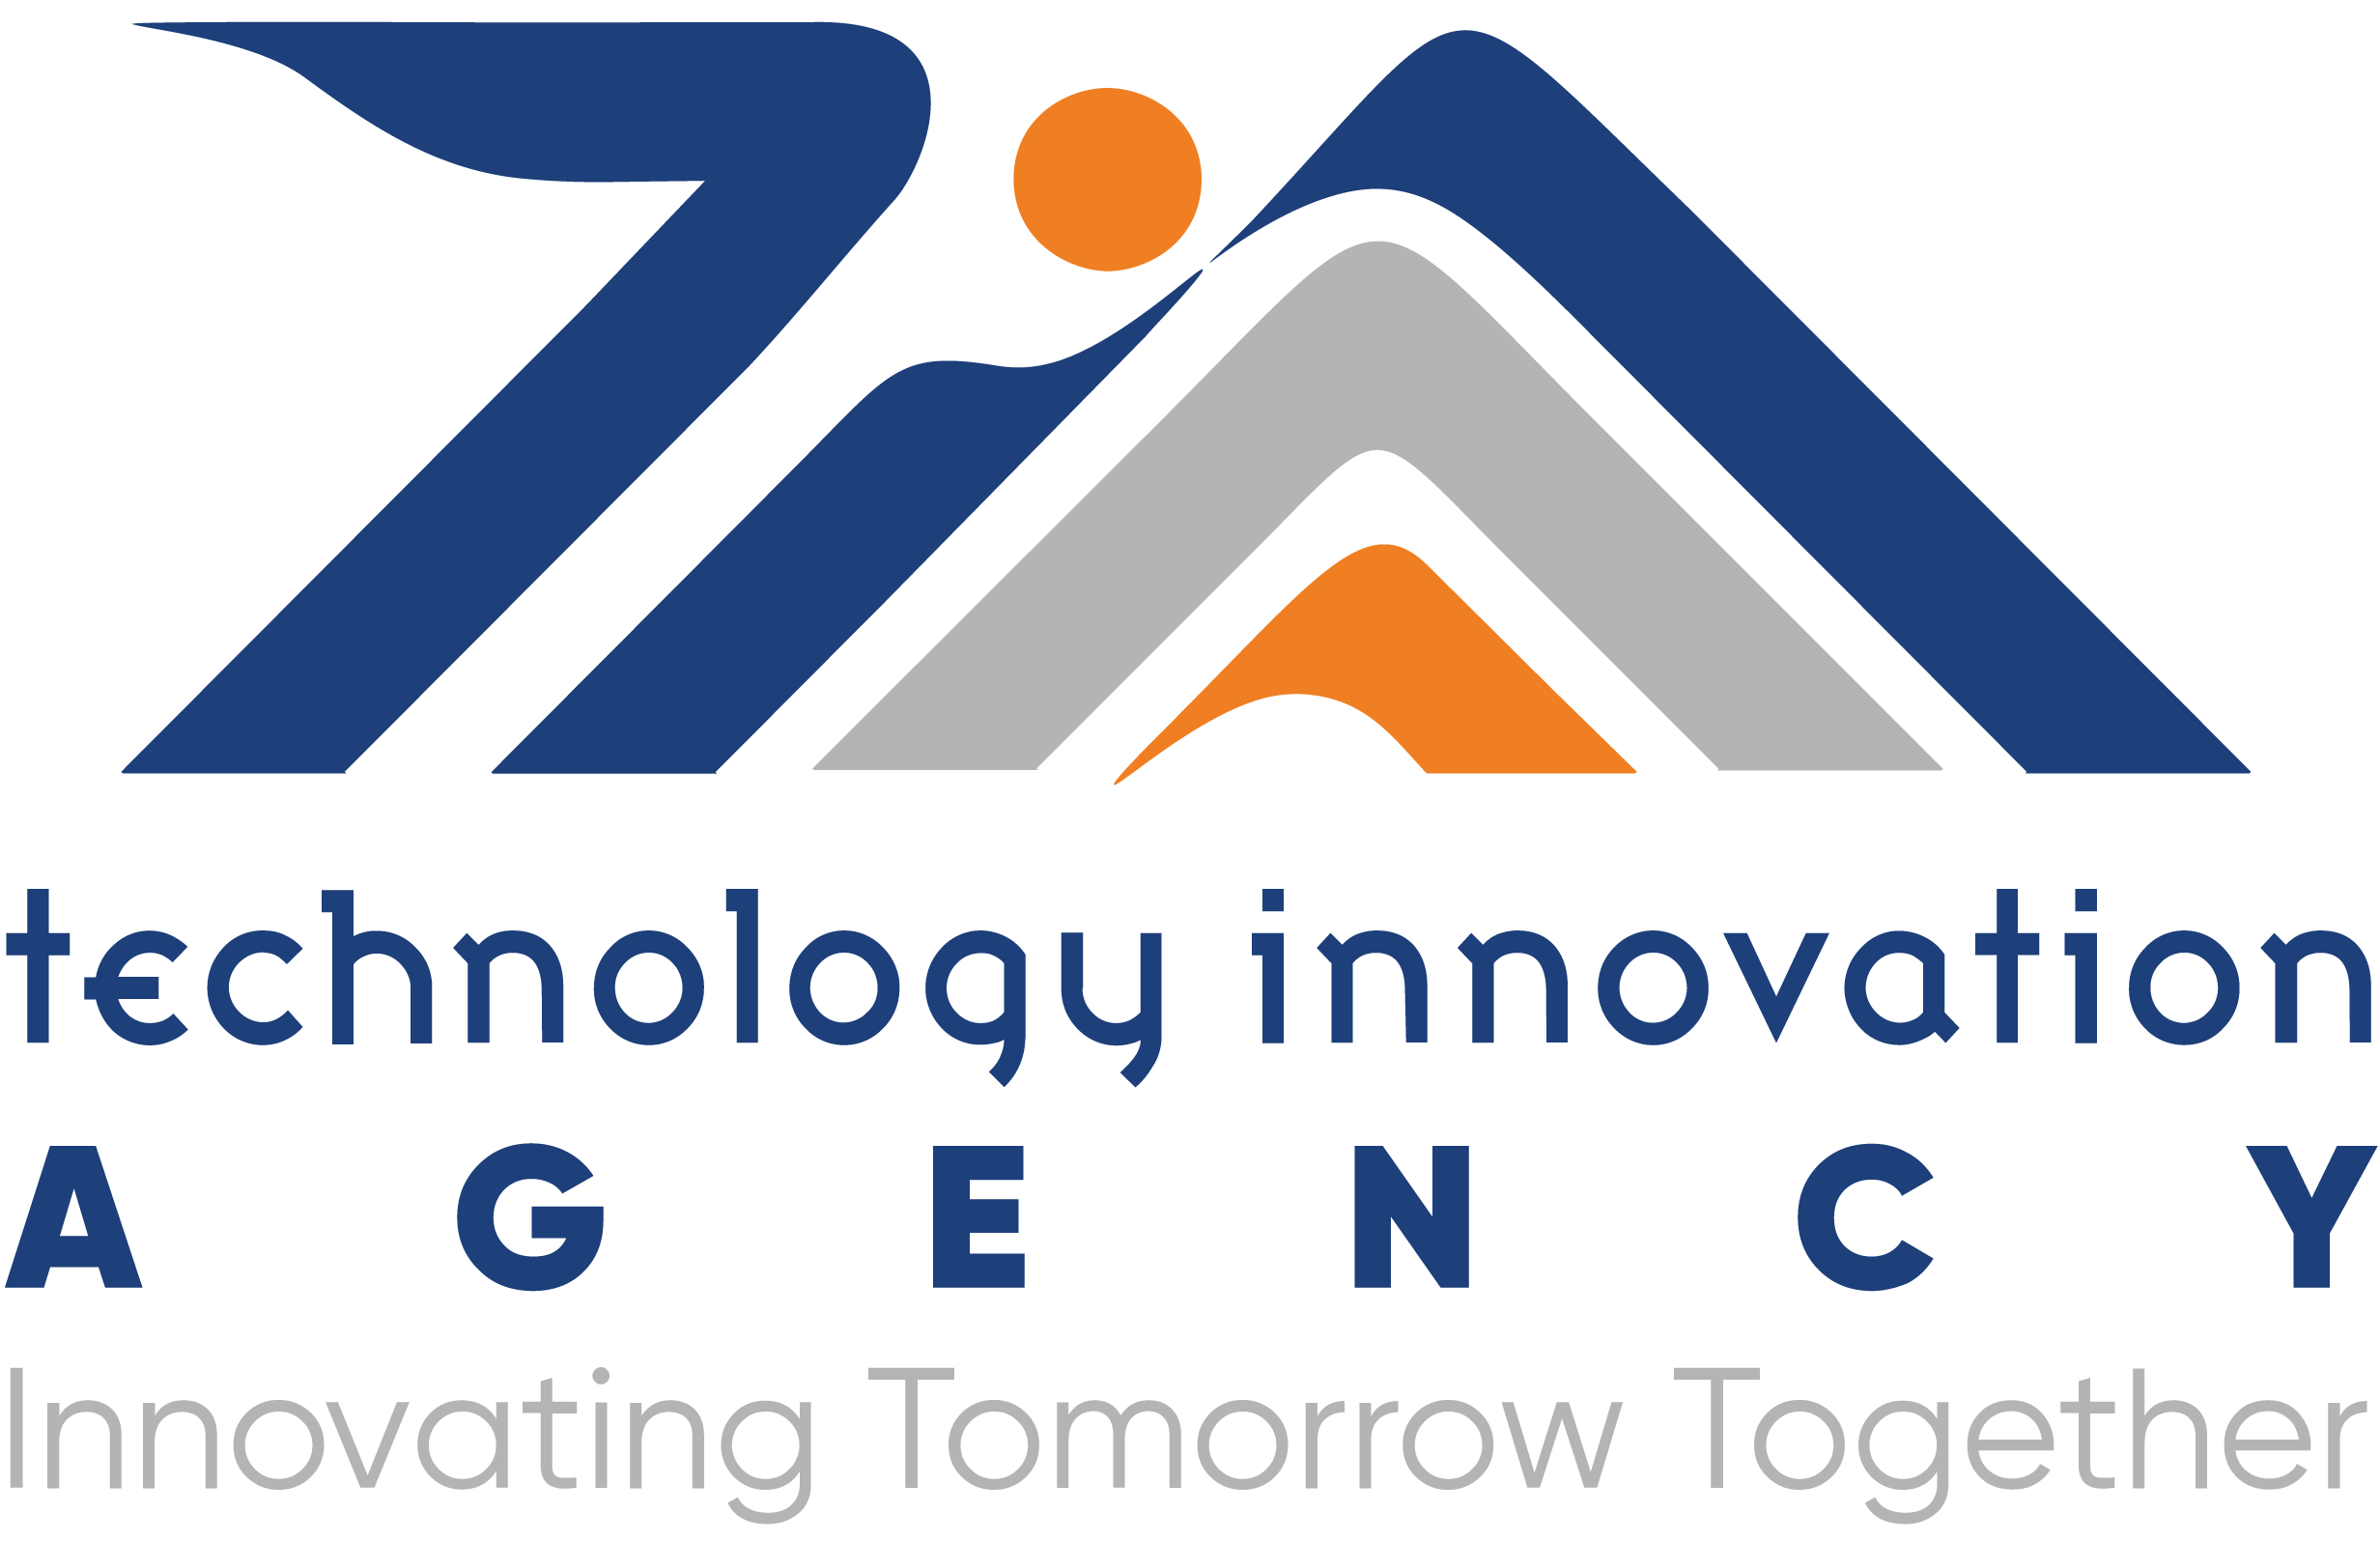 Technology Innovation Agency (TIA) South Africa